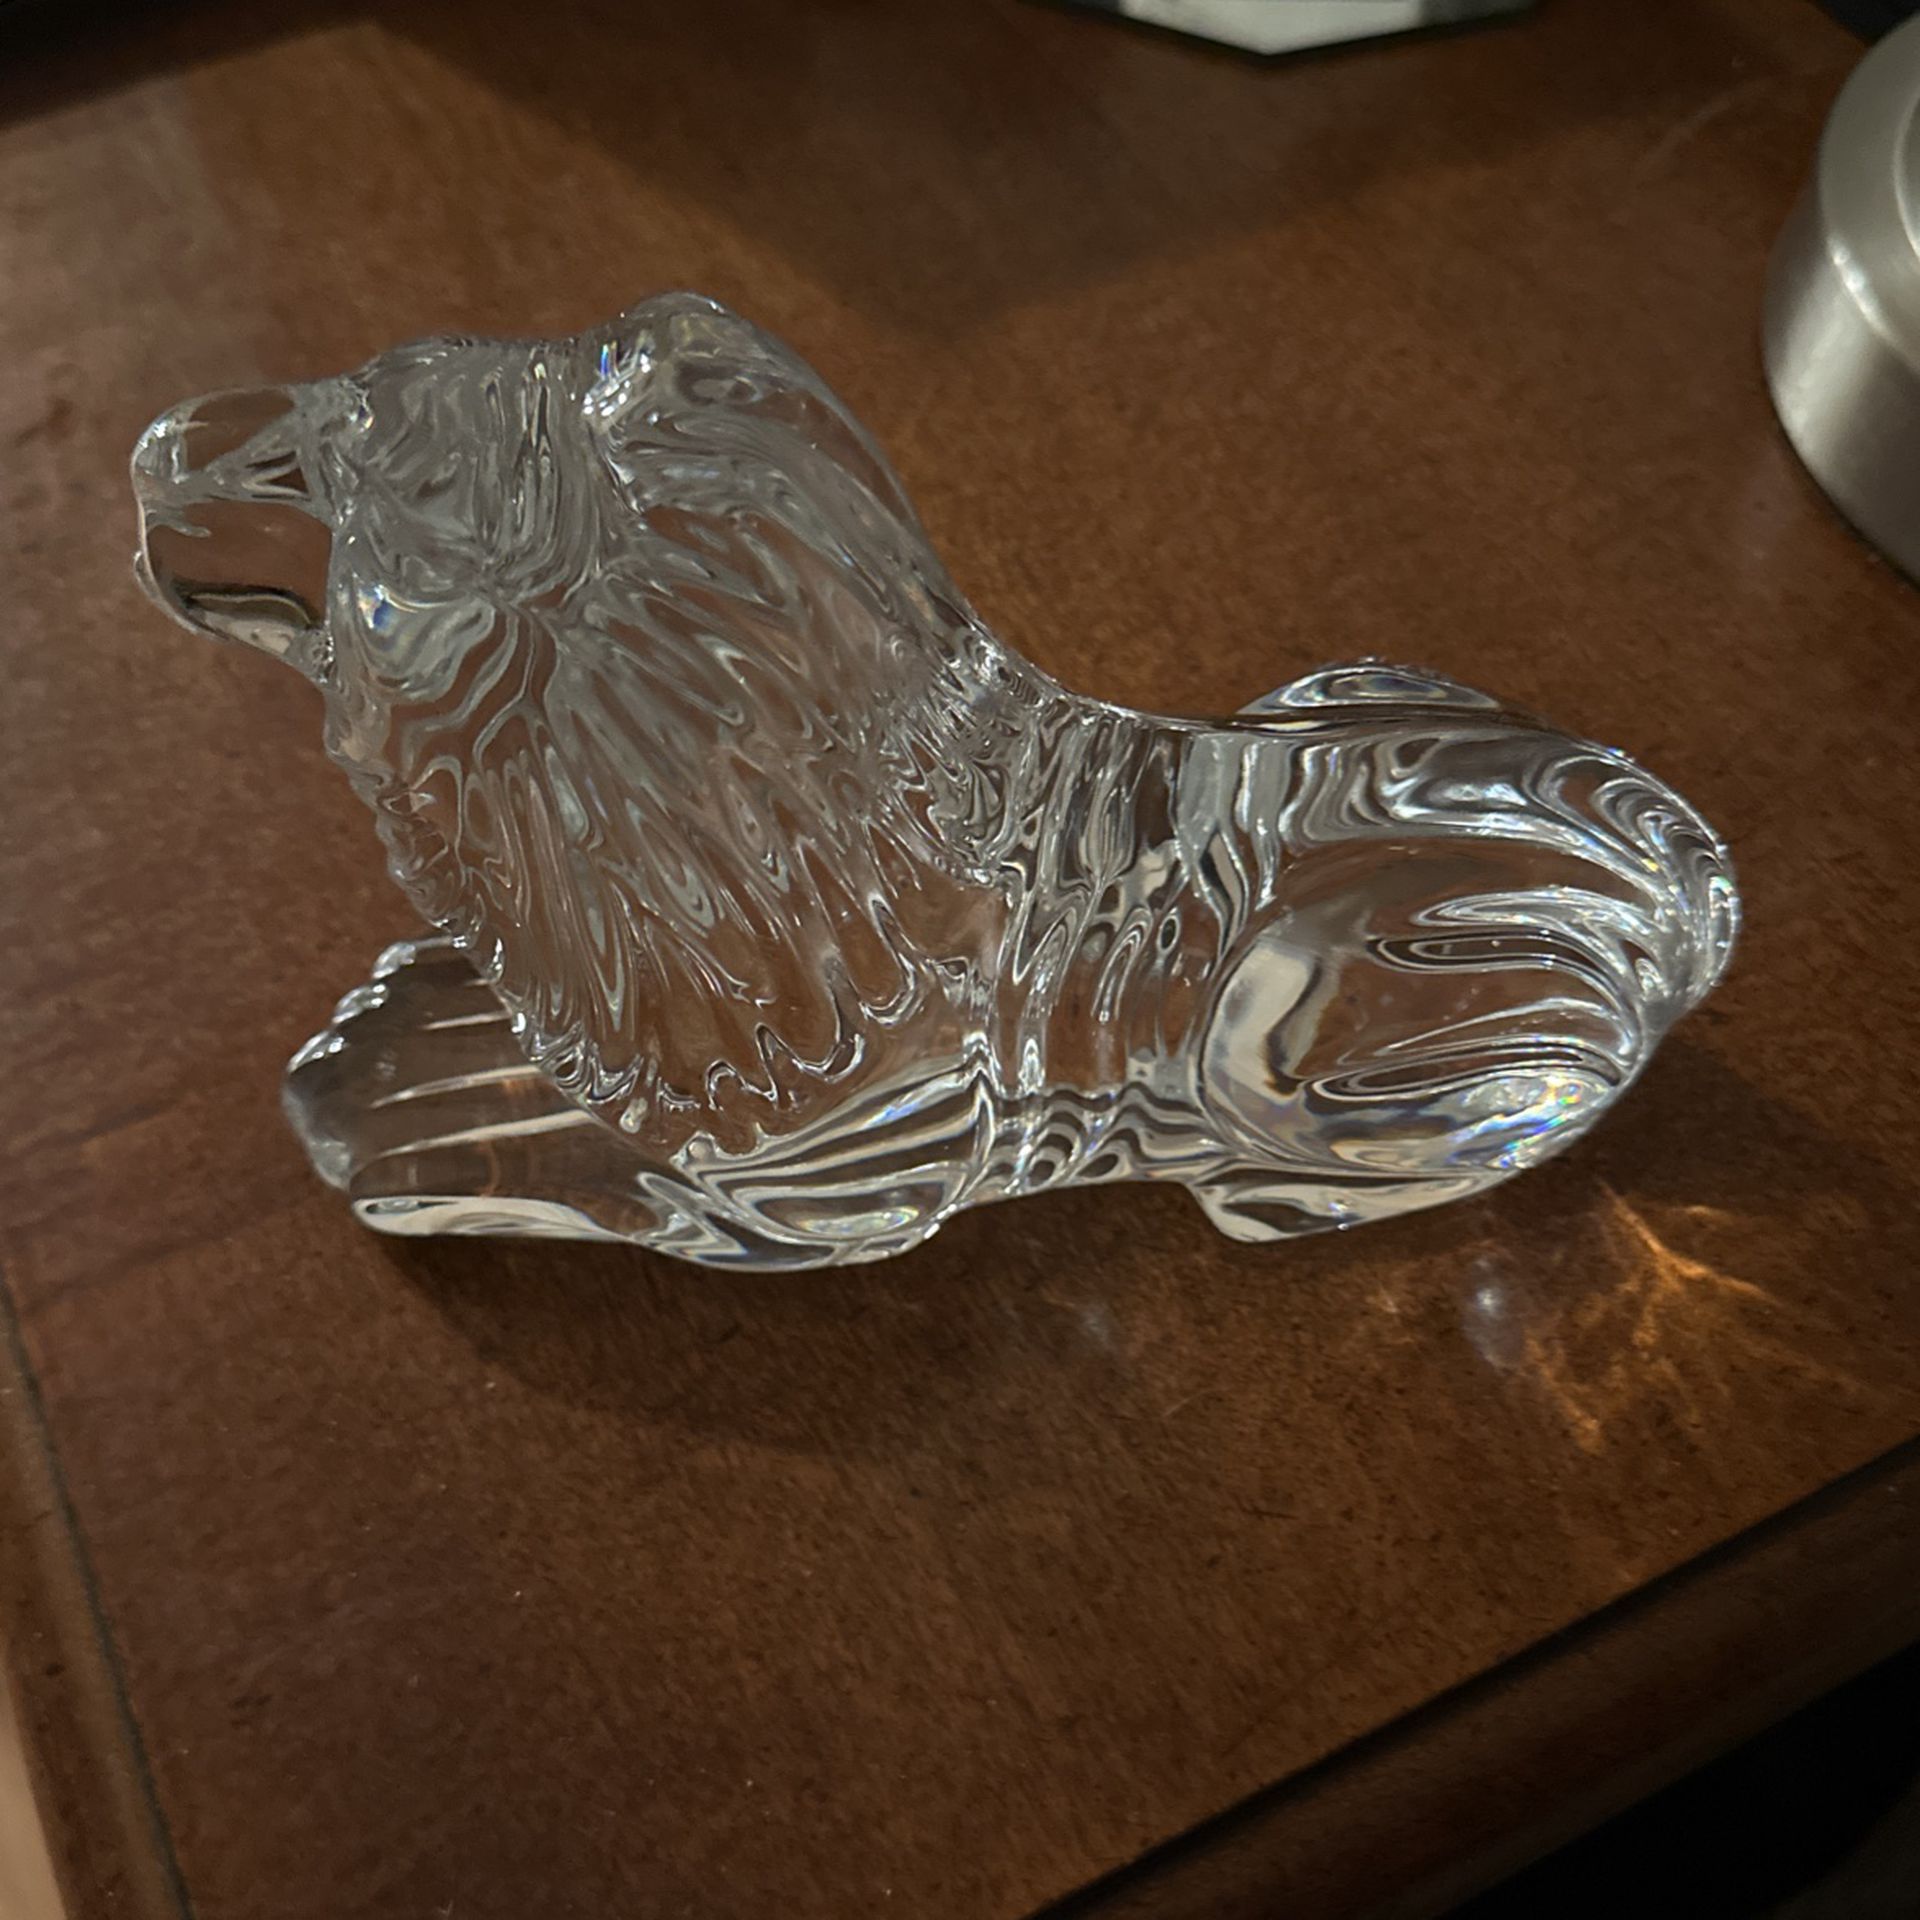 Waterford Crystal Lion, 7" x 4 5/8" x 2 1/4"